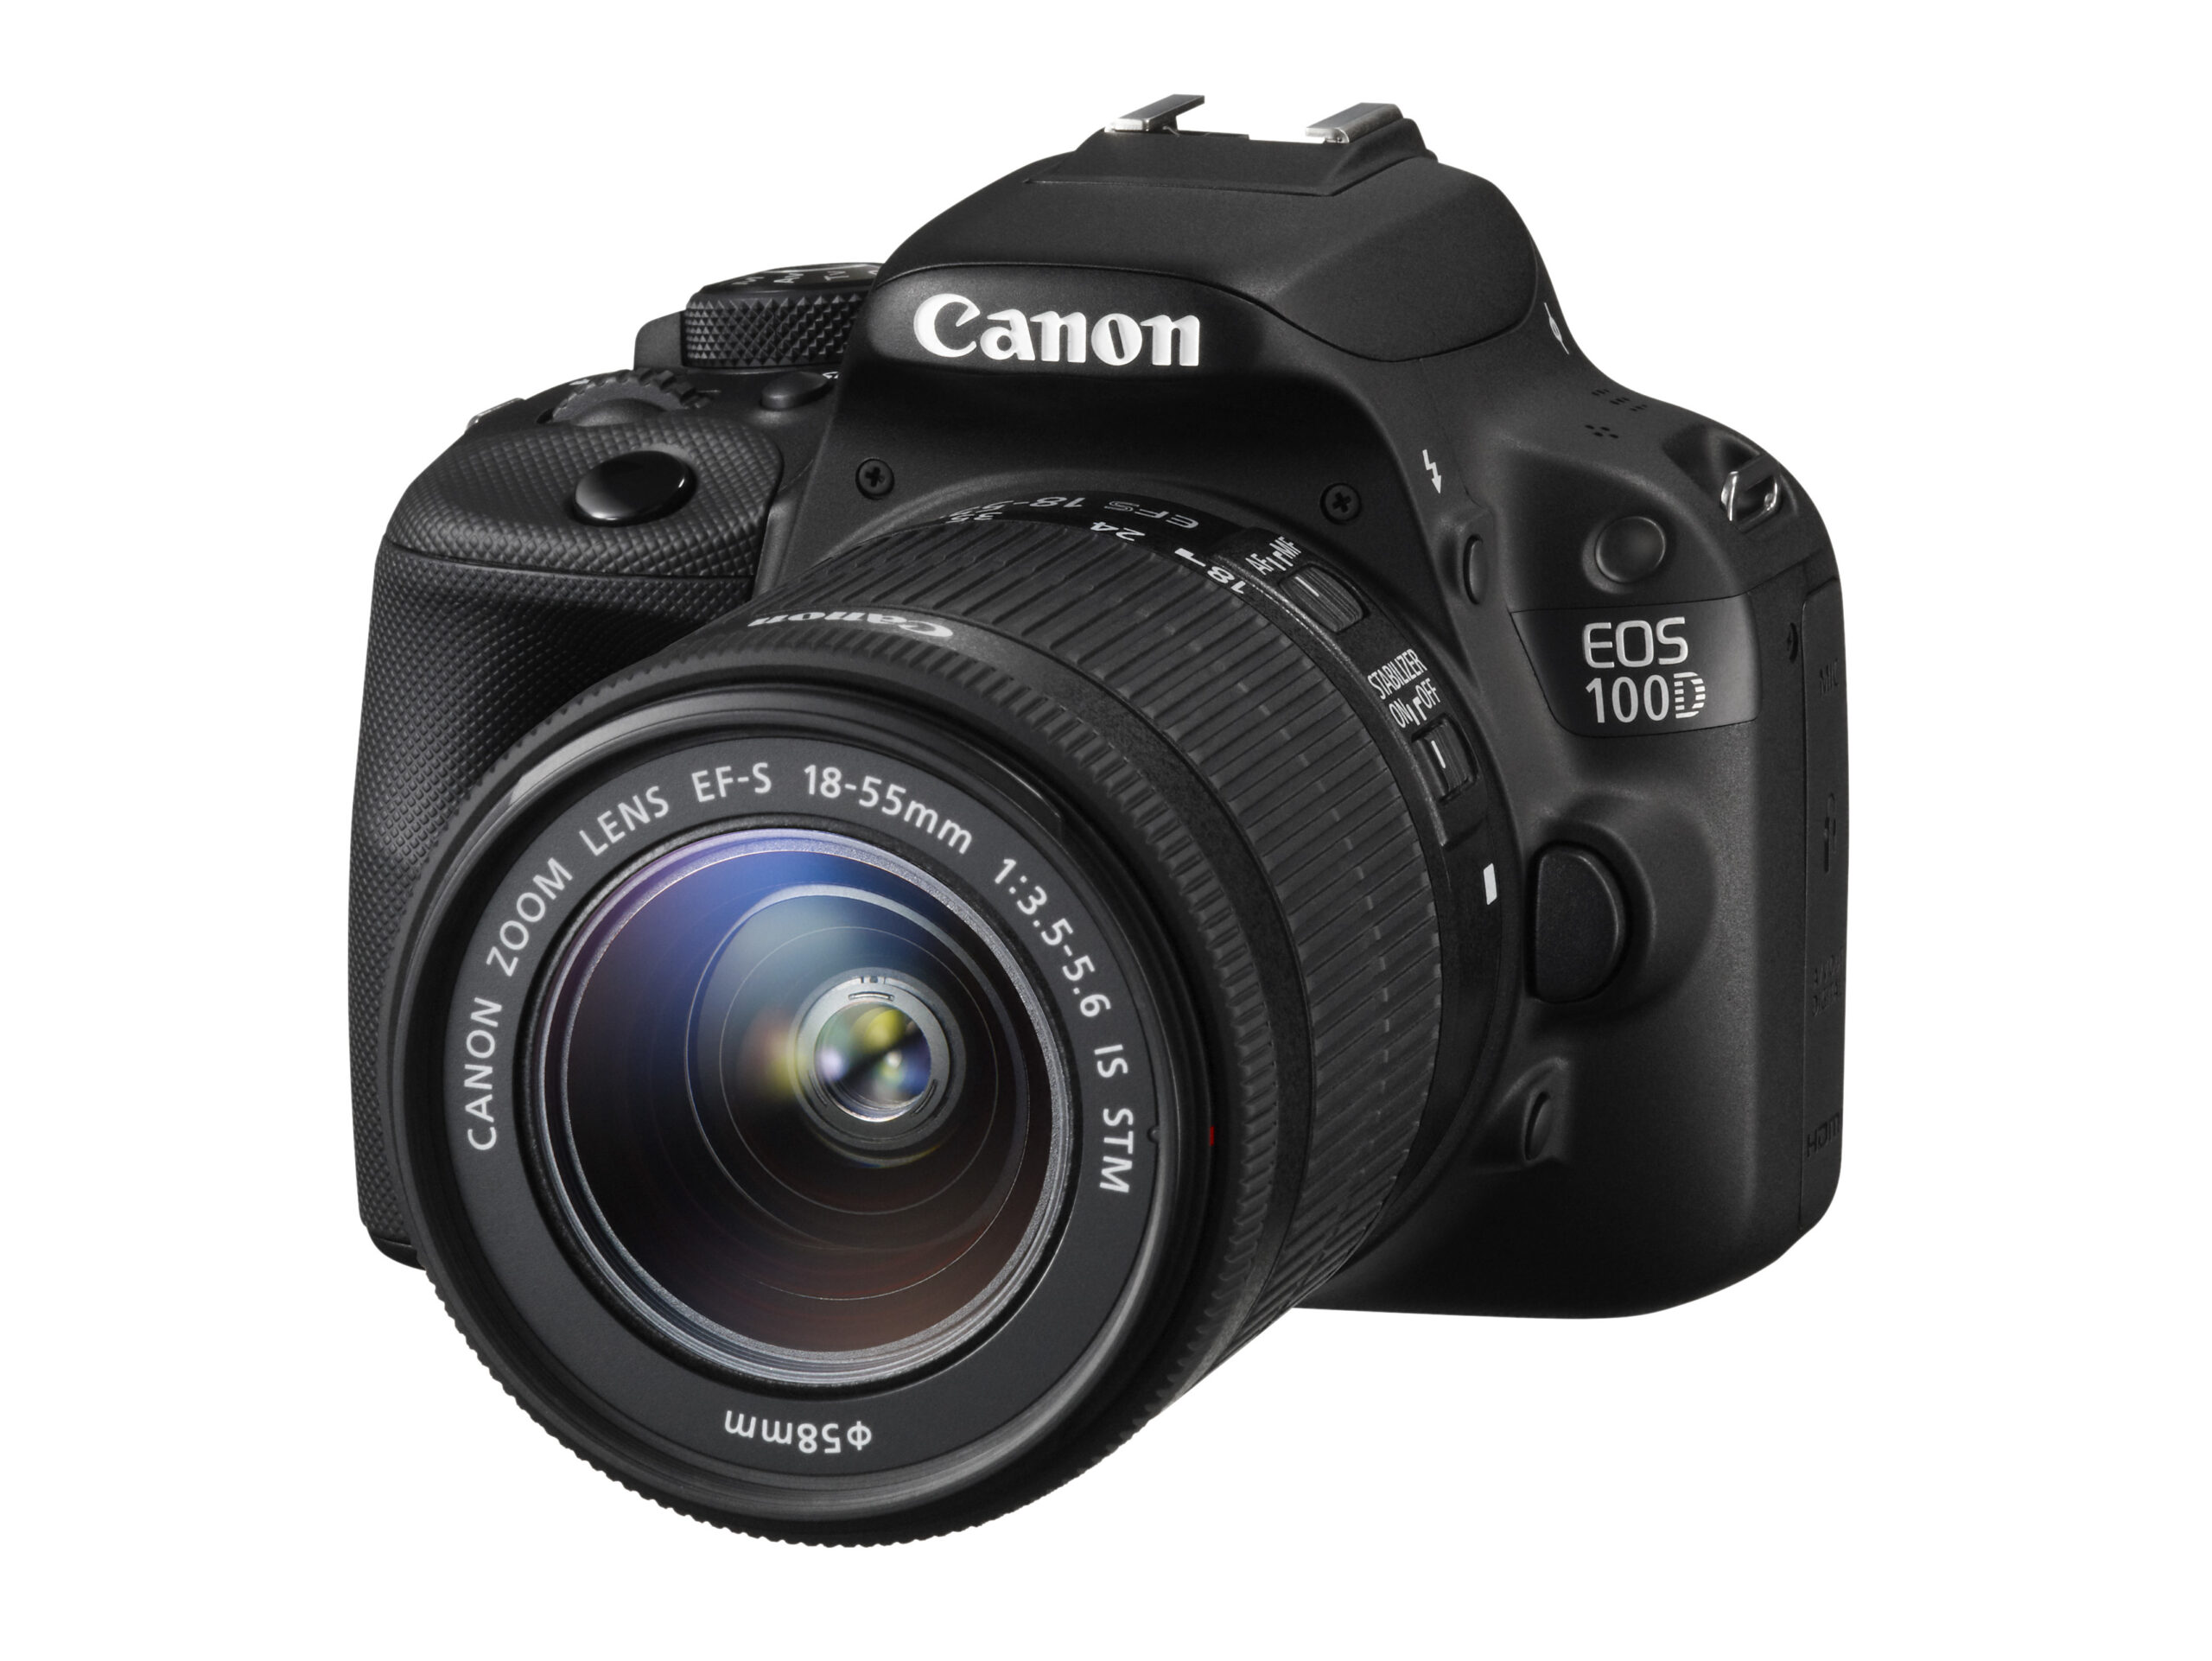 Canon Eos 100d 18 55is Stm